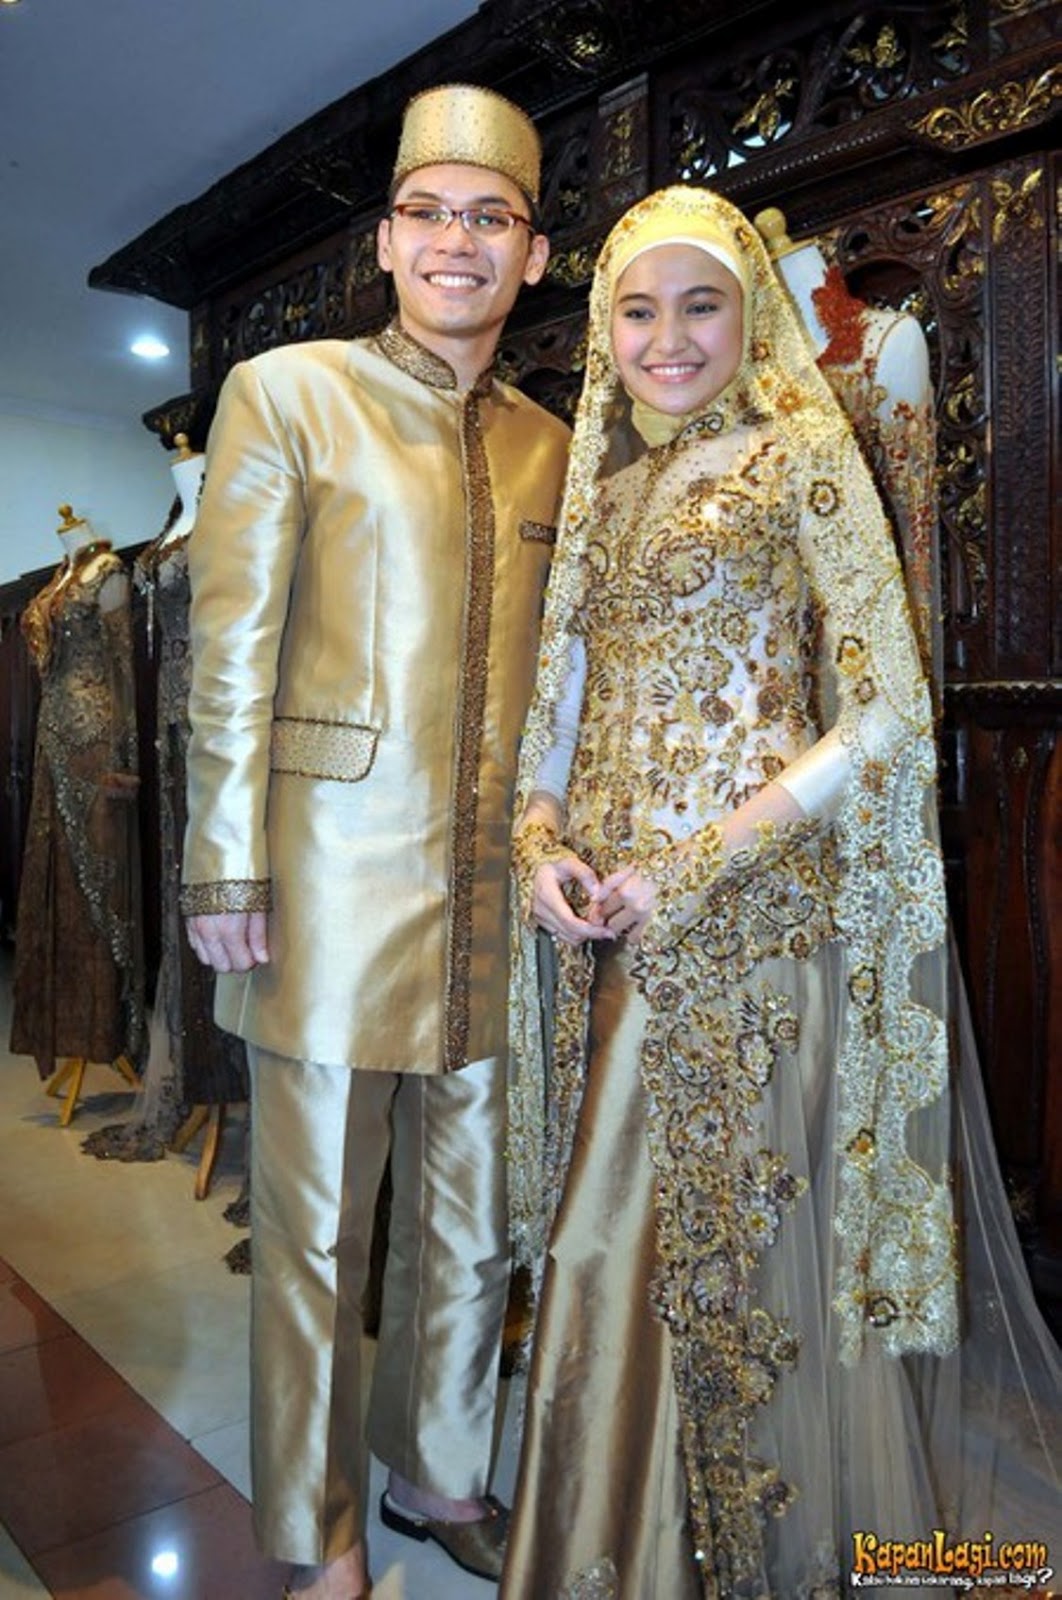 1000+ images about Muslim weddings on Pinterest